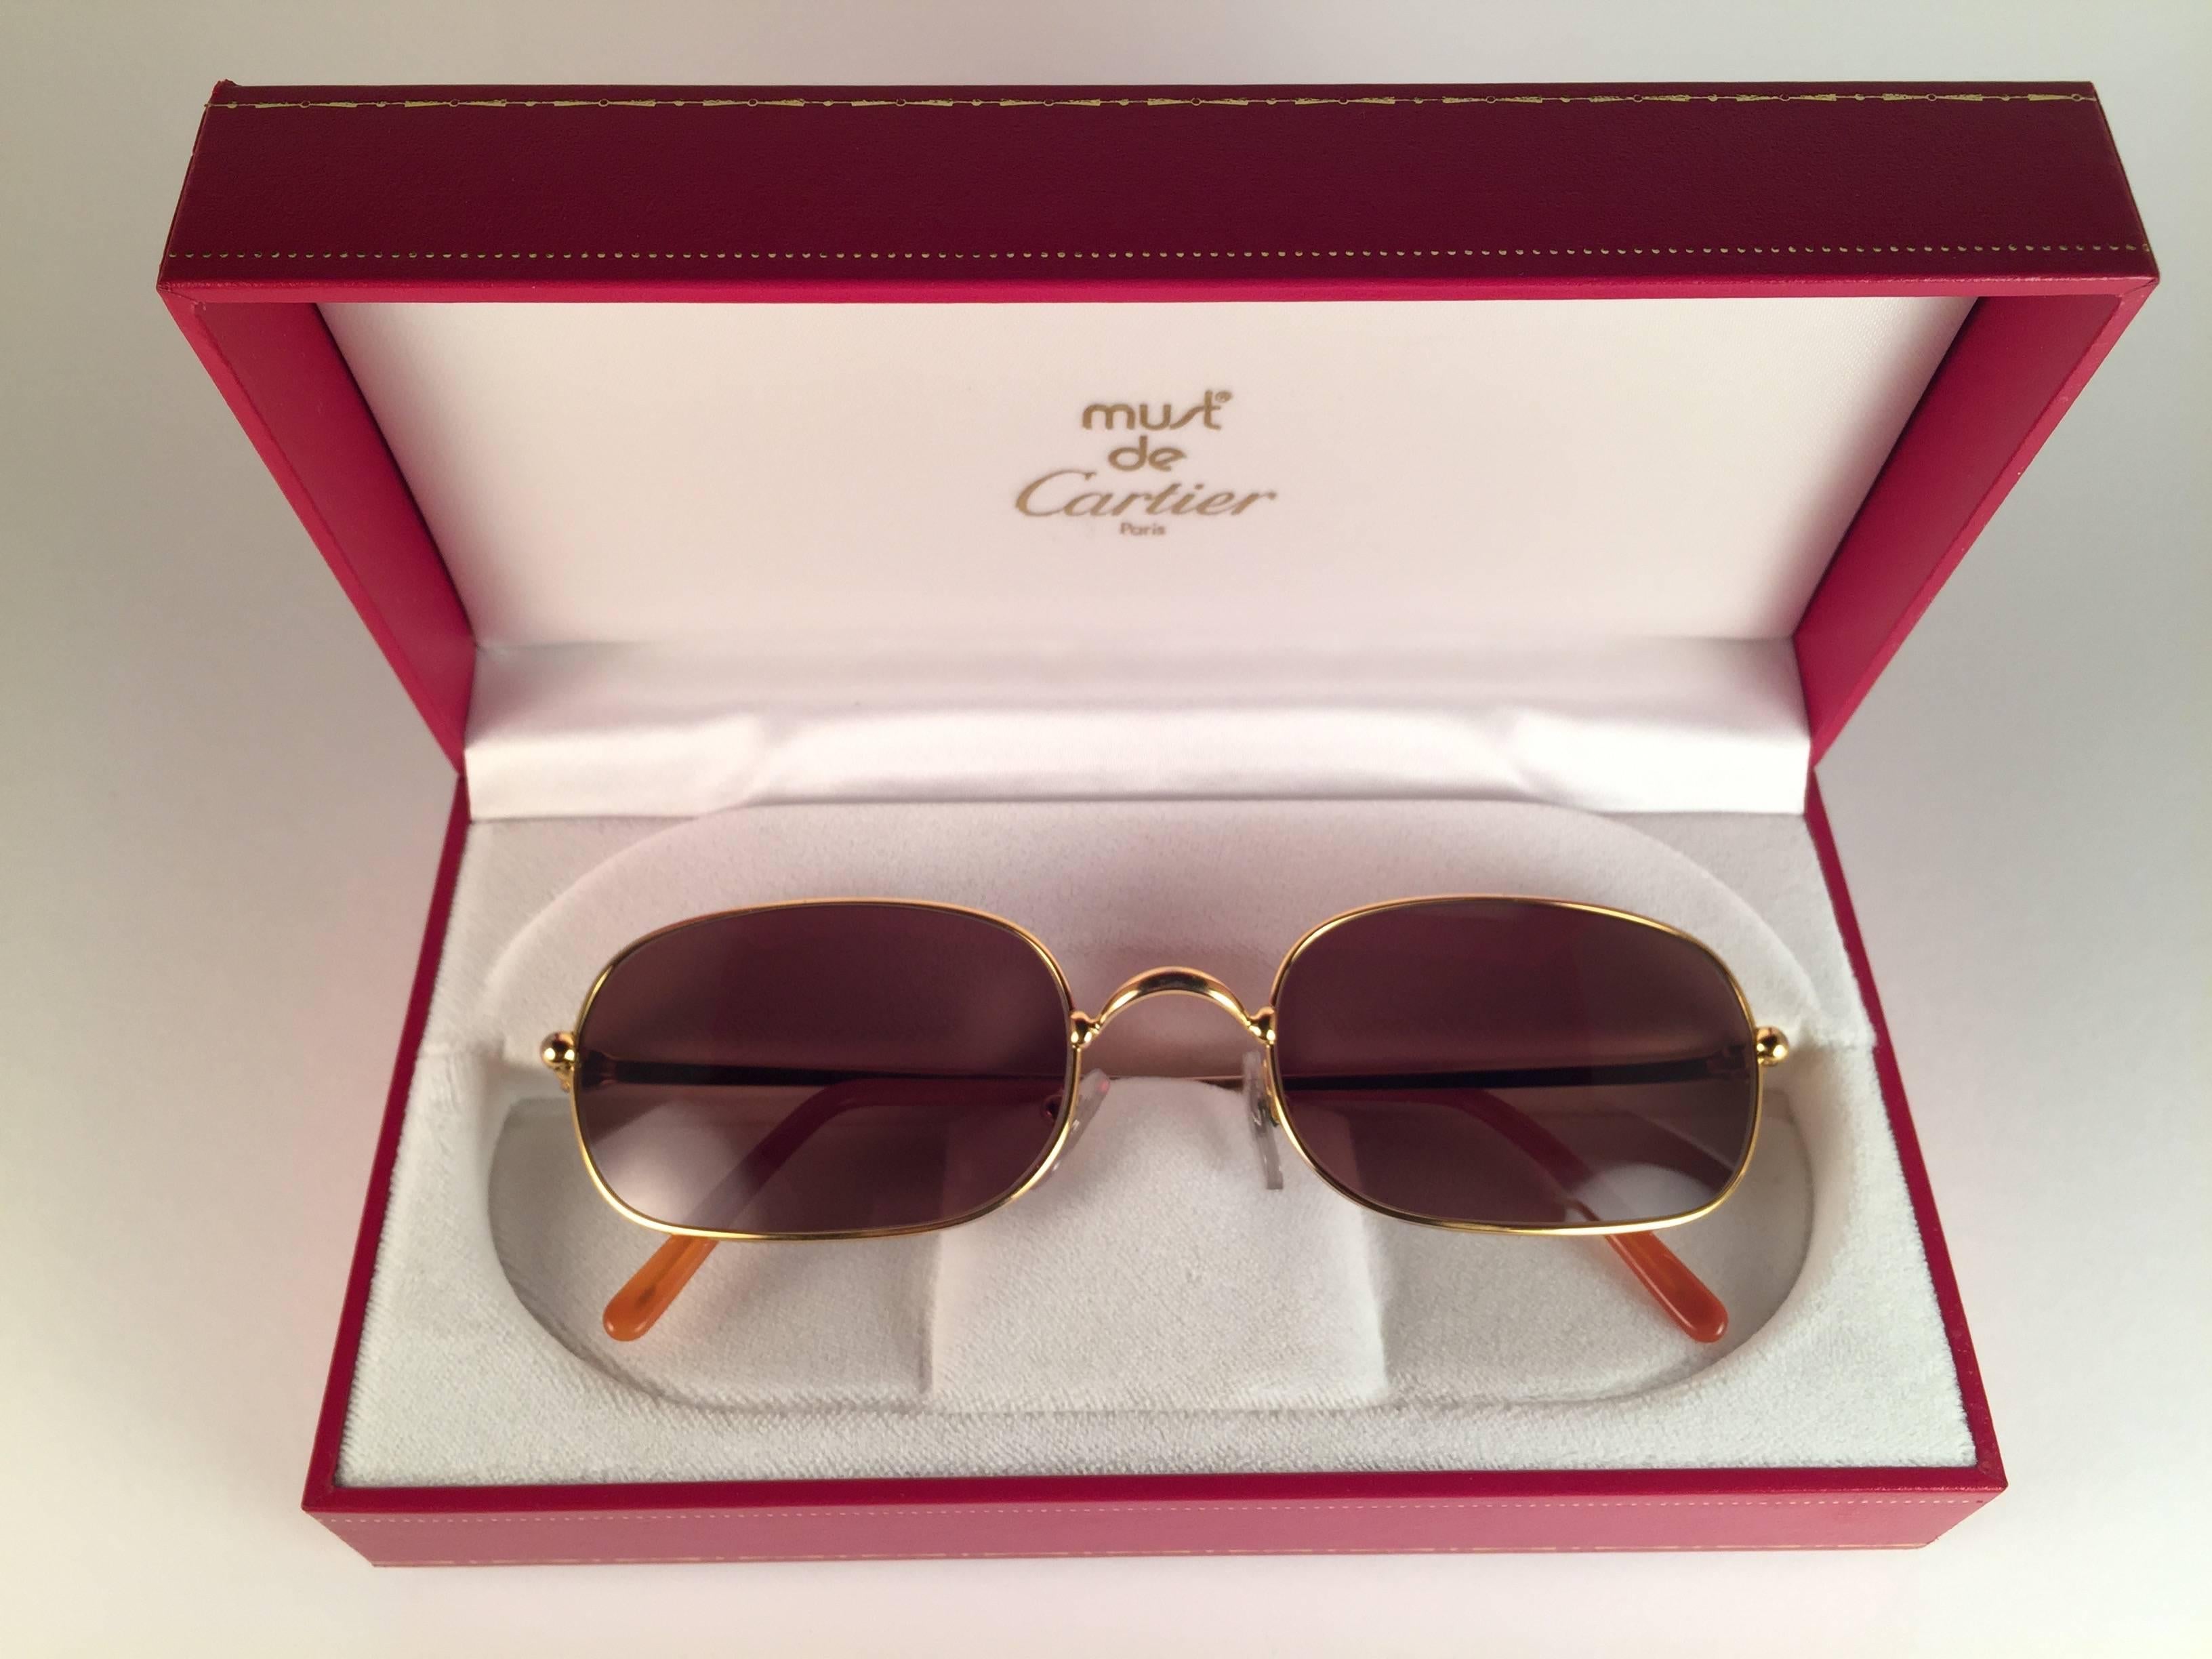 New 1990 Cartier DeimIos 52 MMSunglasses with brown (uv protection) lenses.  All hallmarks. Cartier gold signs on the ear paddles. These are like a pair of jewels on your nose. Beautiful design and a real sign of the times. Original Cartier hard